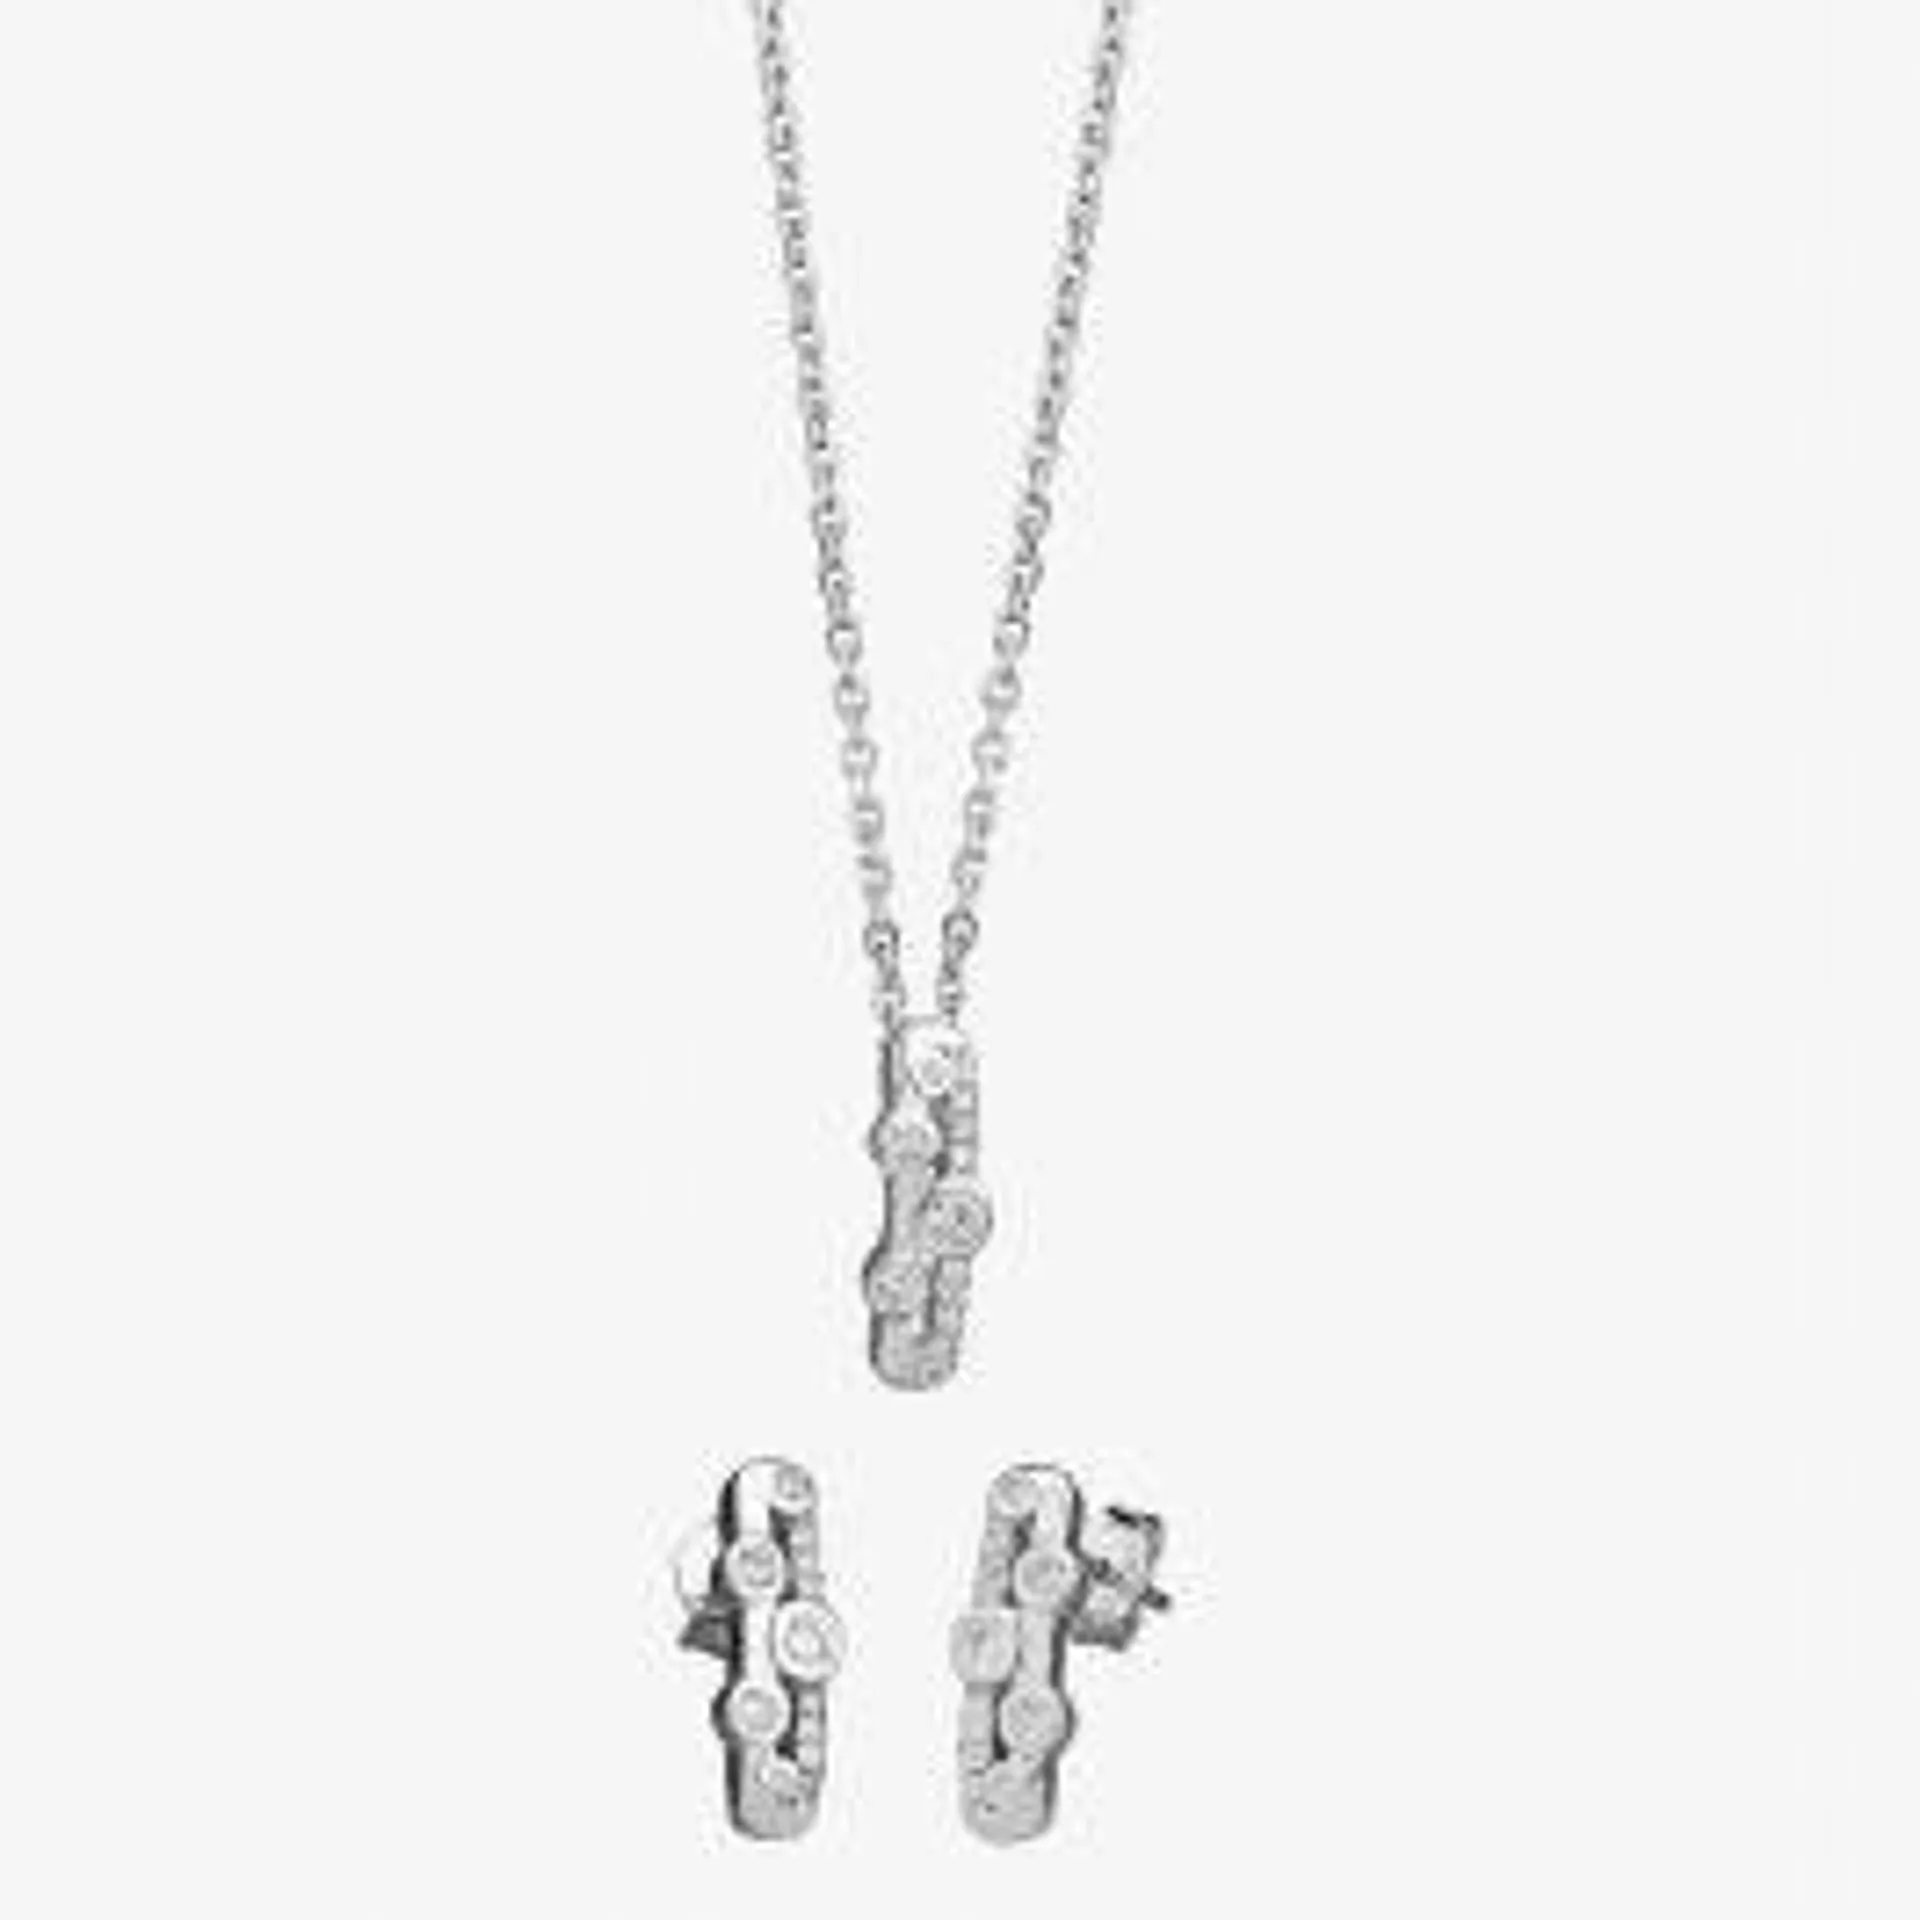 Silver Cubic Zirconia Twin Row Pendant and Earring Set SET11971